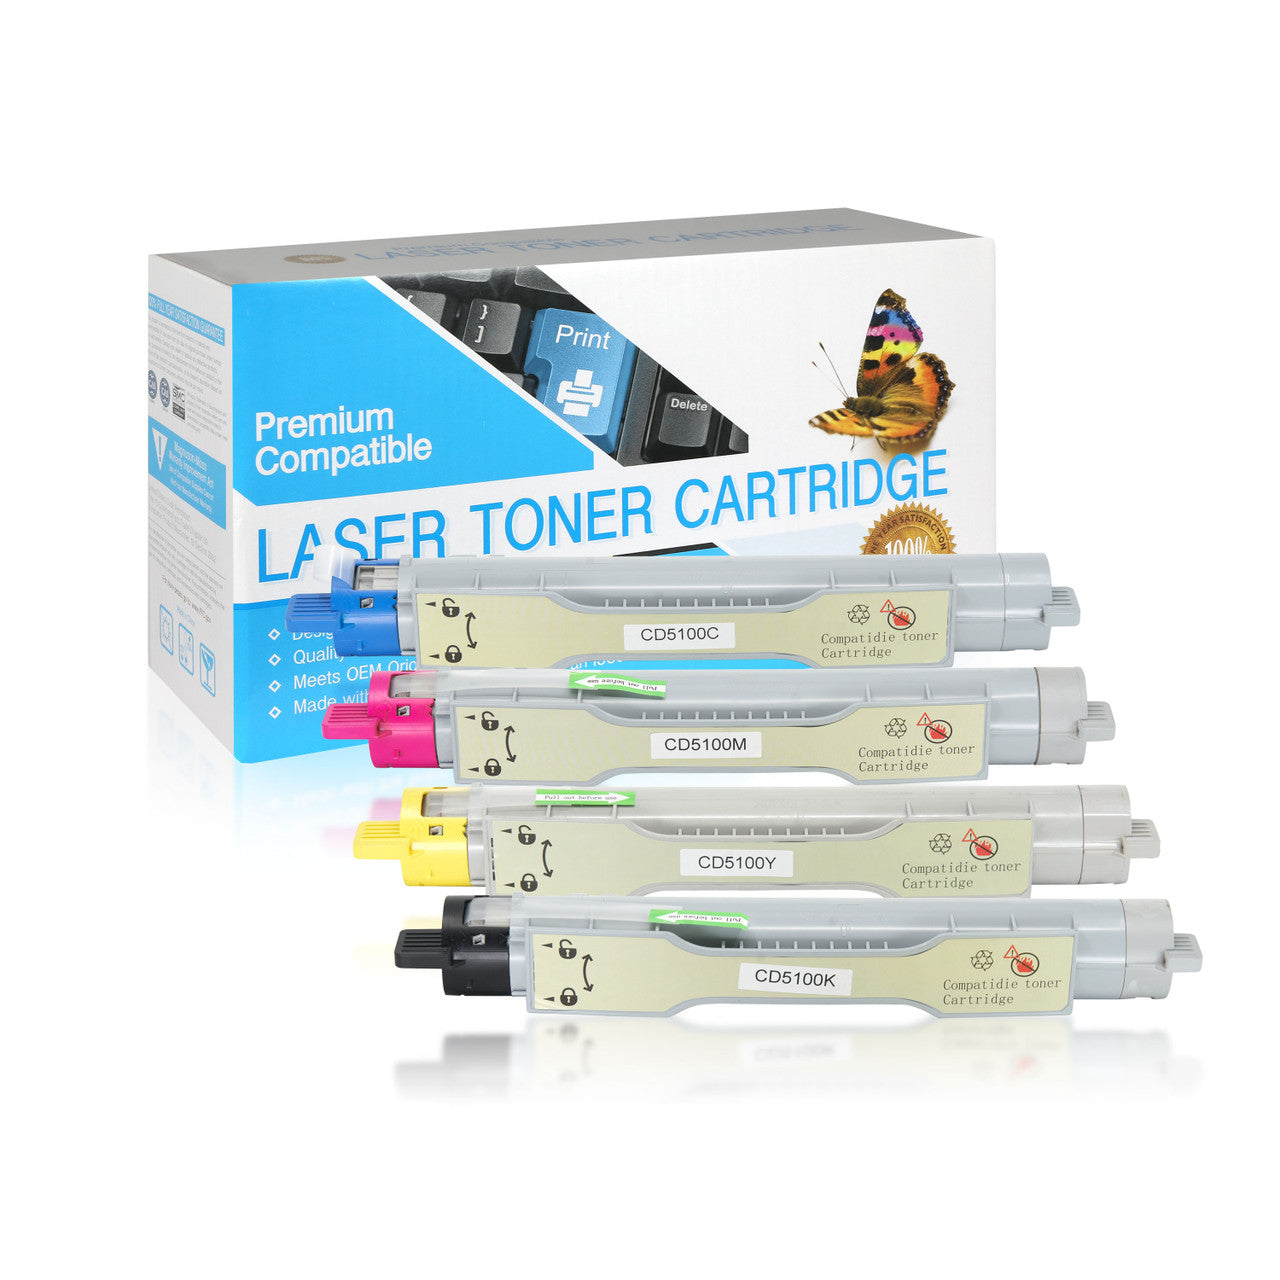 Compatible Dell 5100cn Toner Cartridge (All Colors, High Yield) by SuppliesOutlet